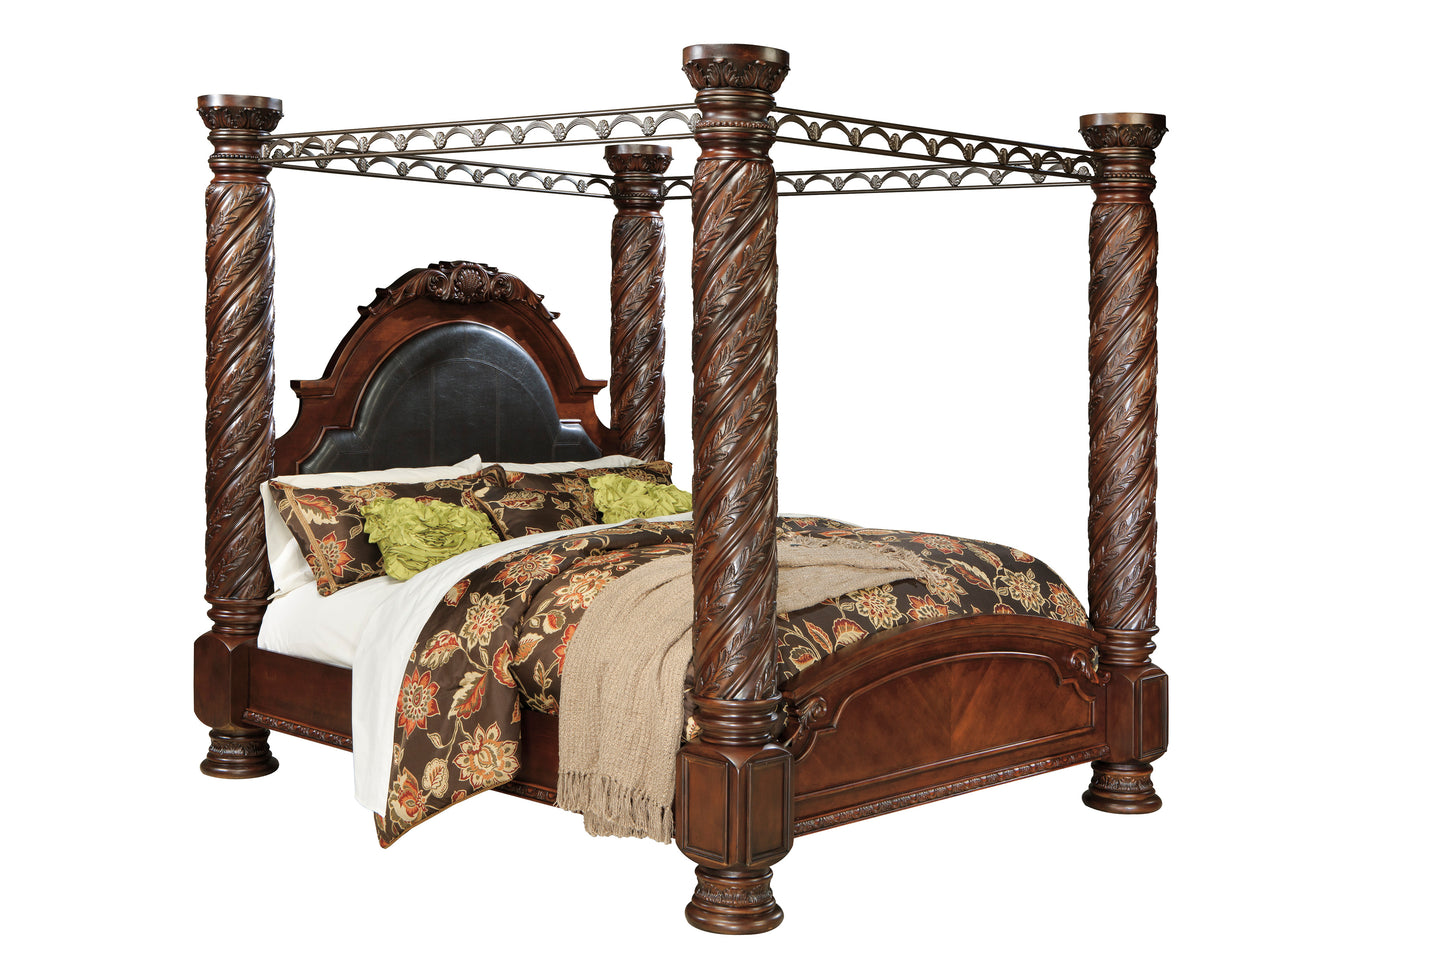 Ashley North Shore 6PC Bedroom Set E King Poster Canopy Bed Dresser Mirror Two Nightstand Chest in Dark Brown